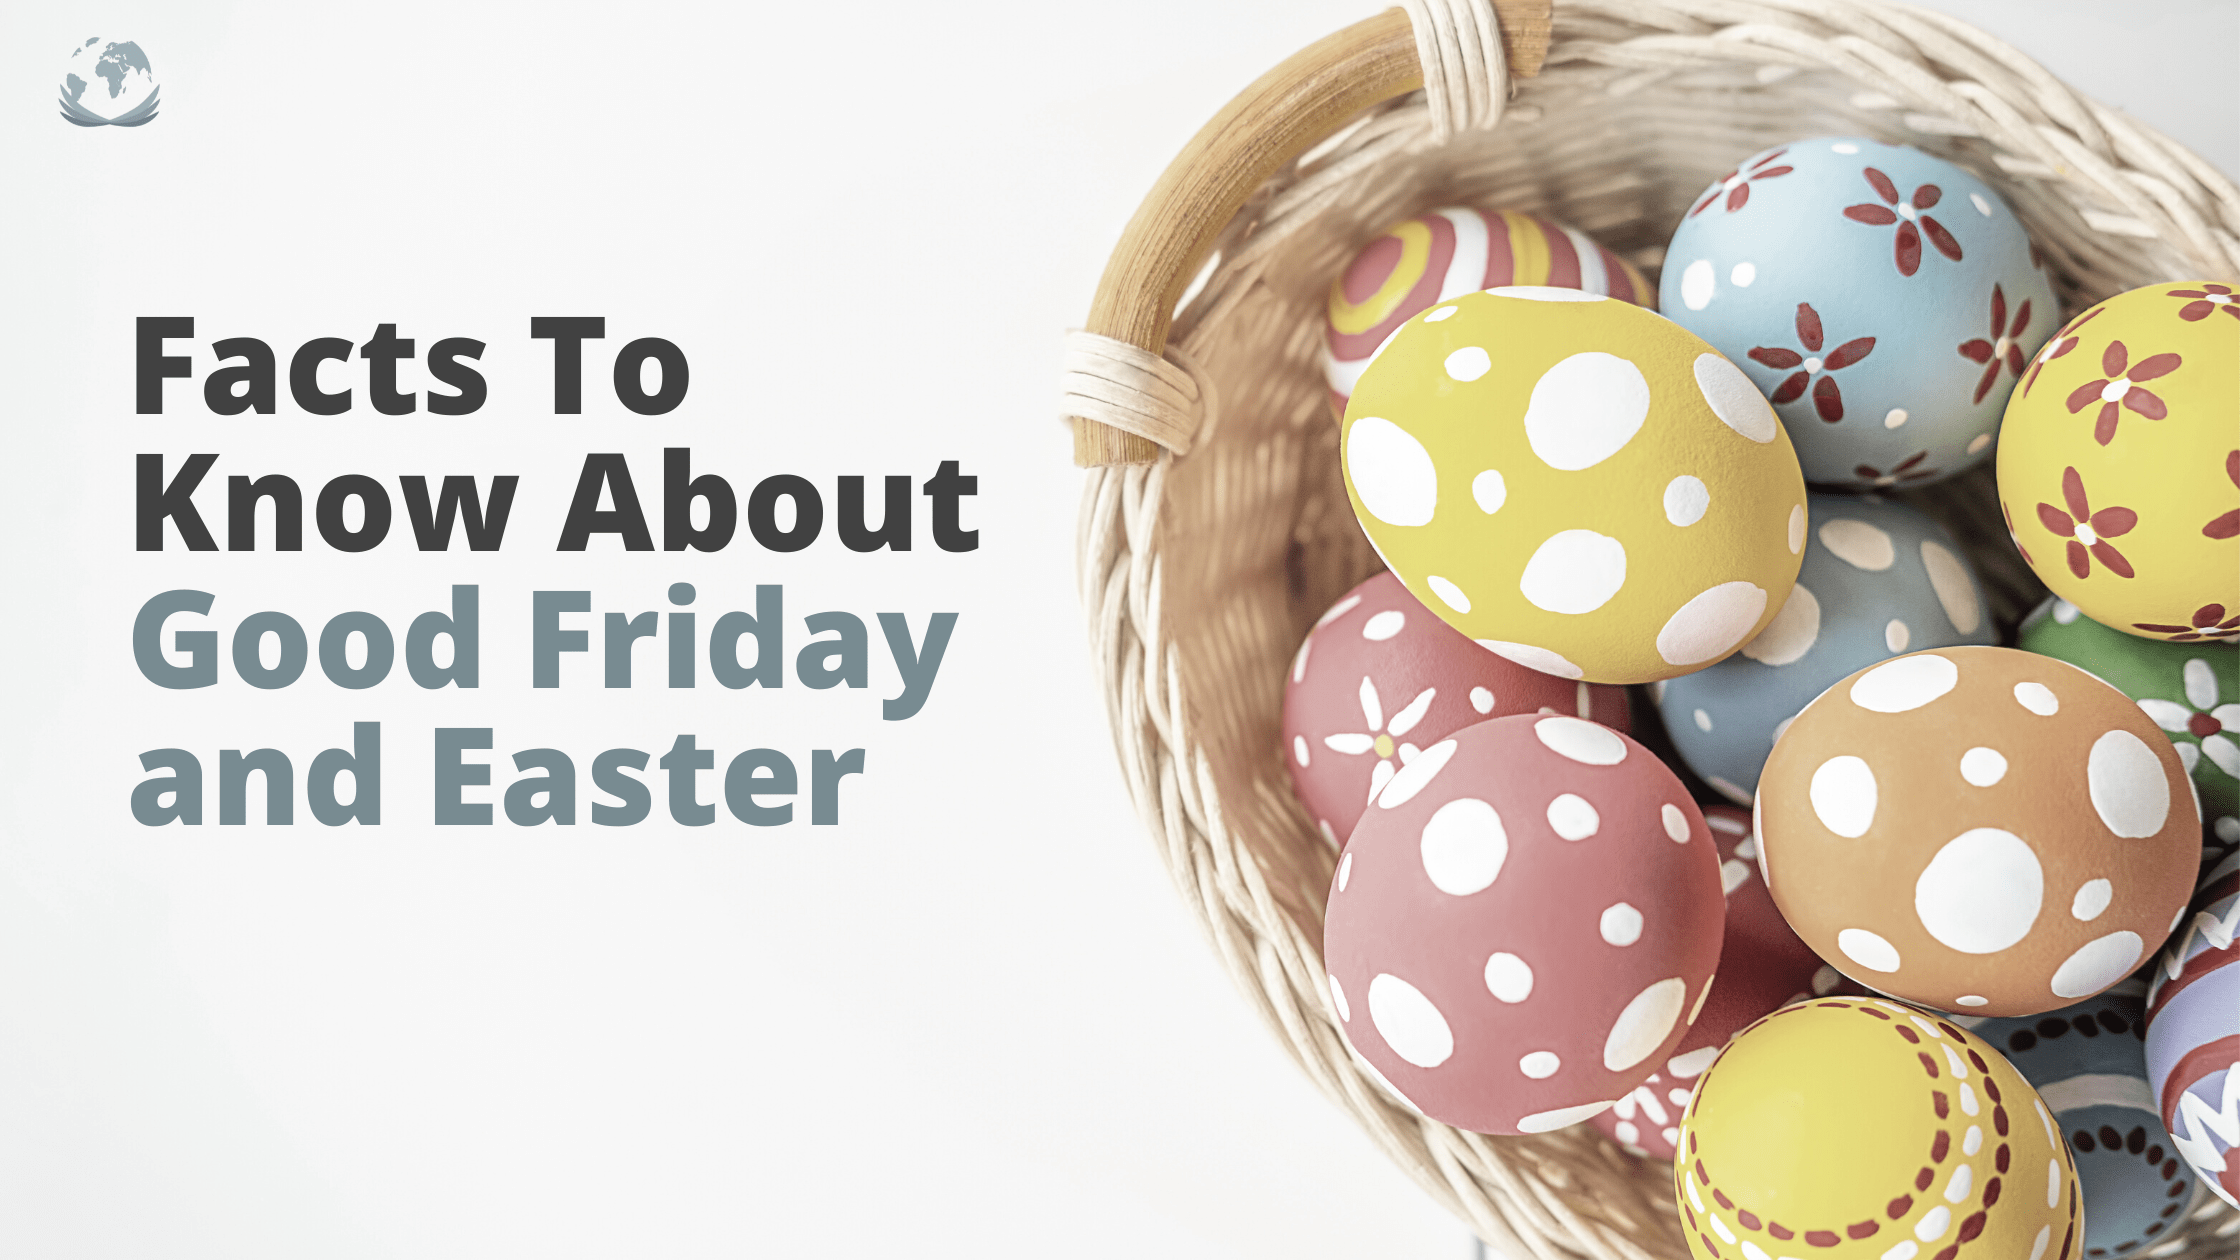 15 Interesting Facts To Know About Good Friday and Easter